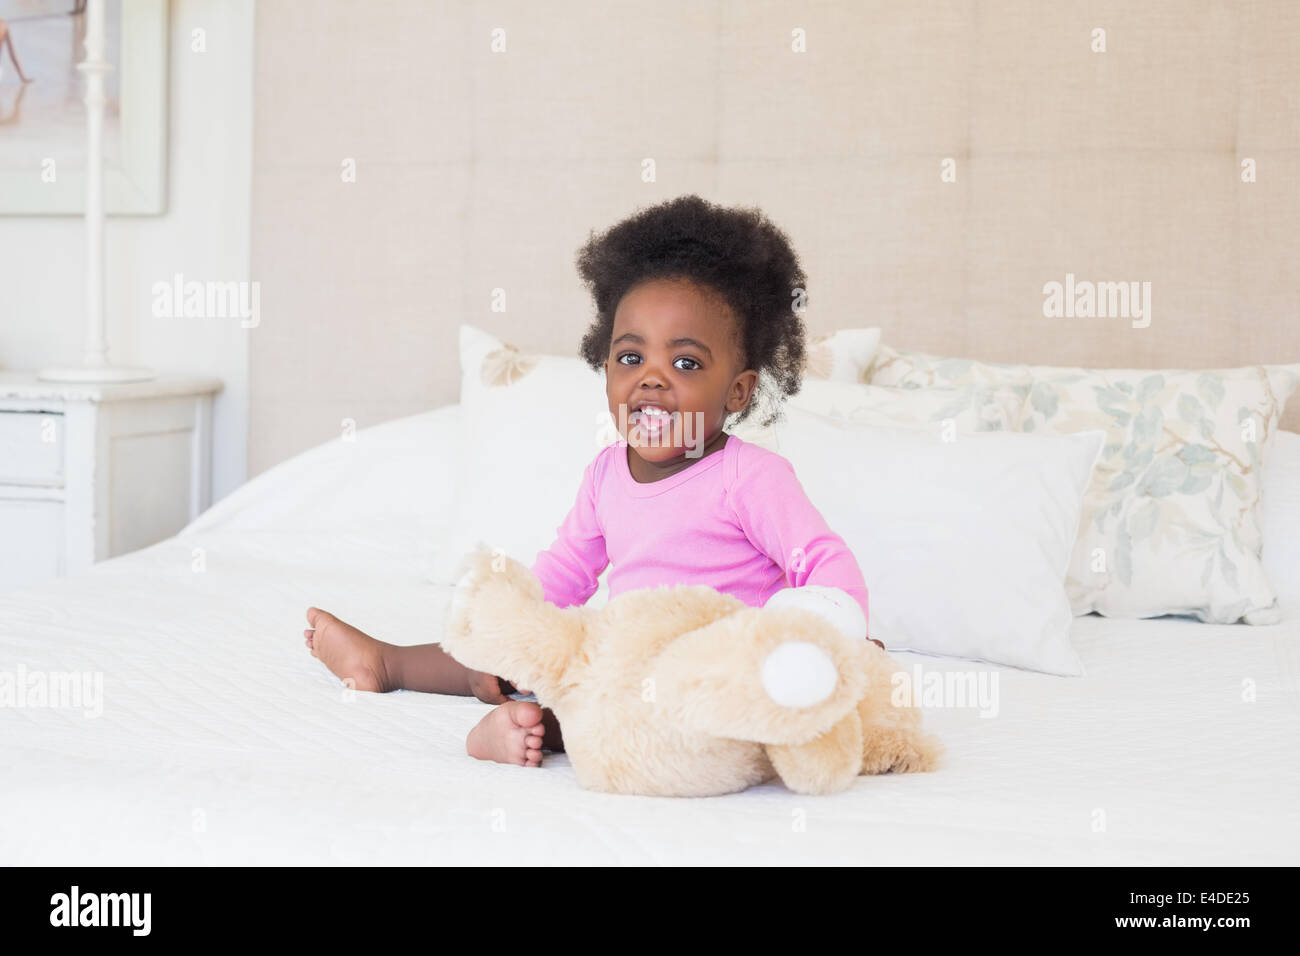 Baby girl in pink babygro sitting on bed Stock Photo